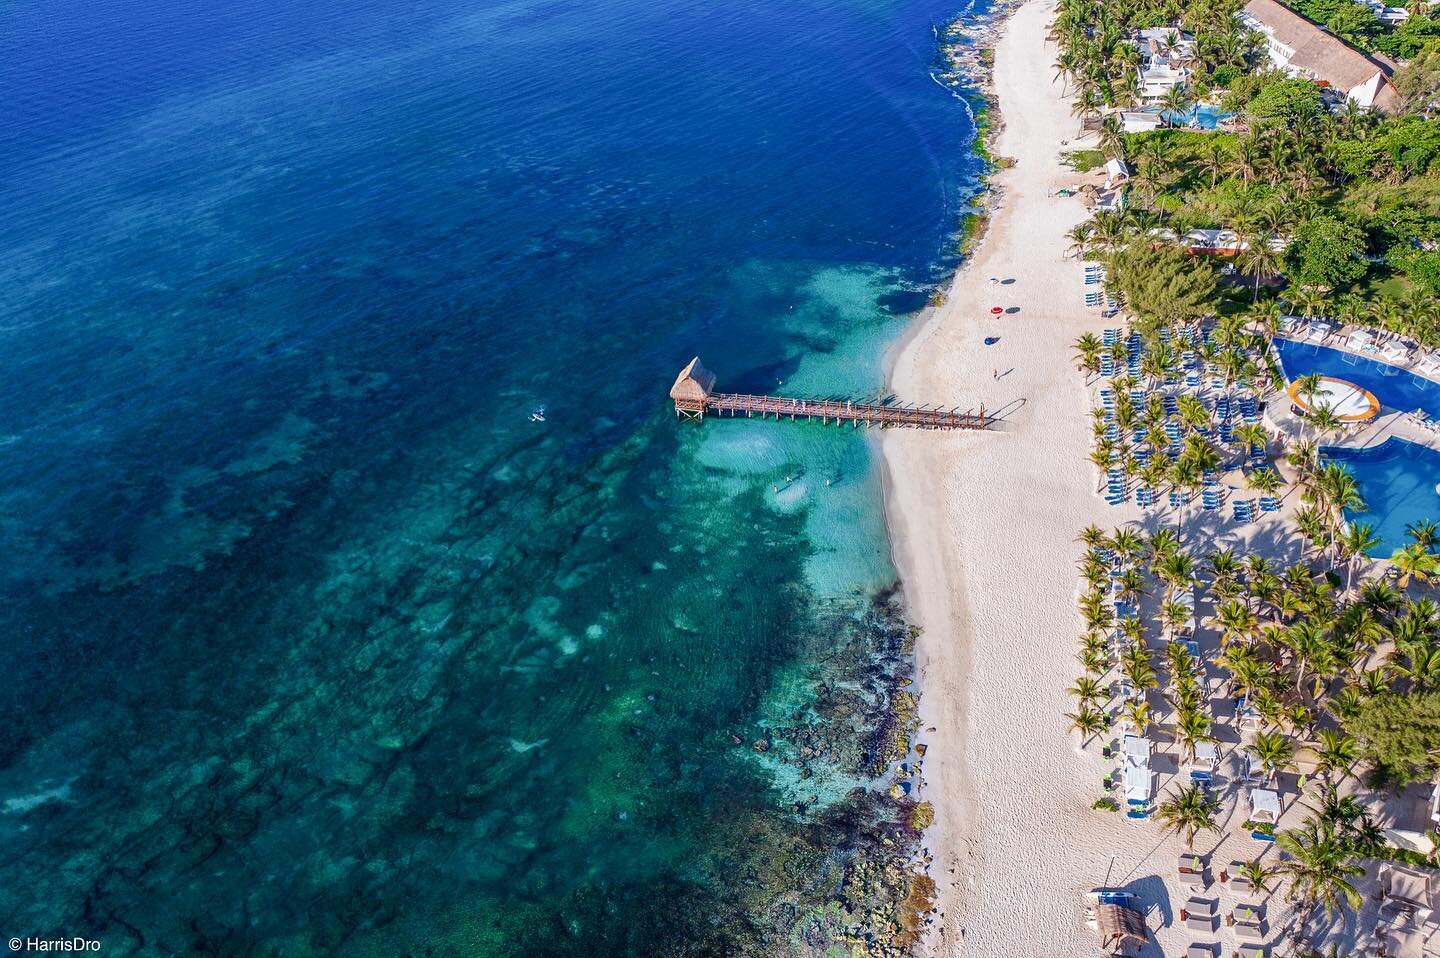 What a vista of sun, sand and clear blue sea - this pier is peerless! #mexico #rivieramaya #playdelcarmen #beach #beachlife #viceroy #viceroyhotel #drone #dronephotography 
.
.
.
.
.
#droneemperors #droneoftheday #bluesea #sandybeach #resort #beautif